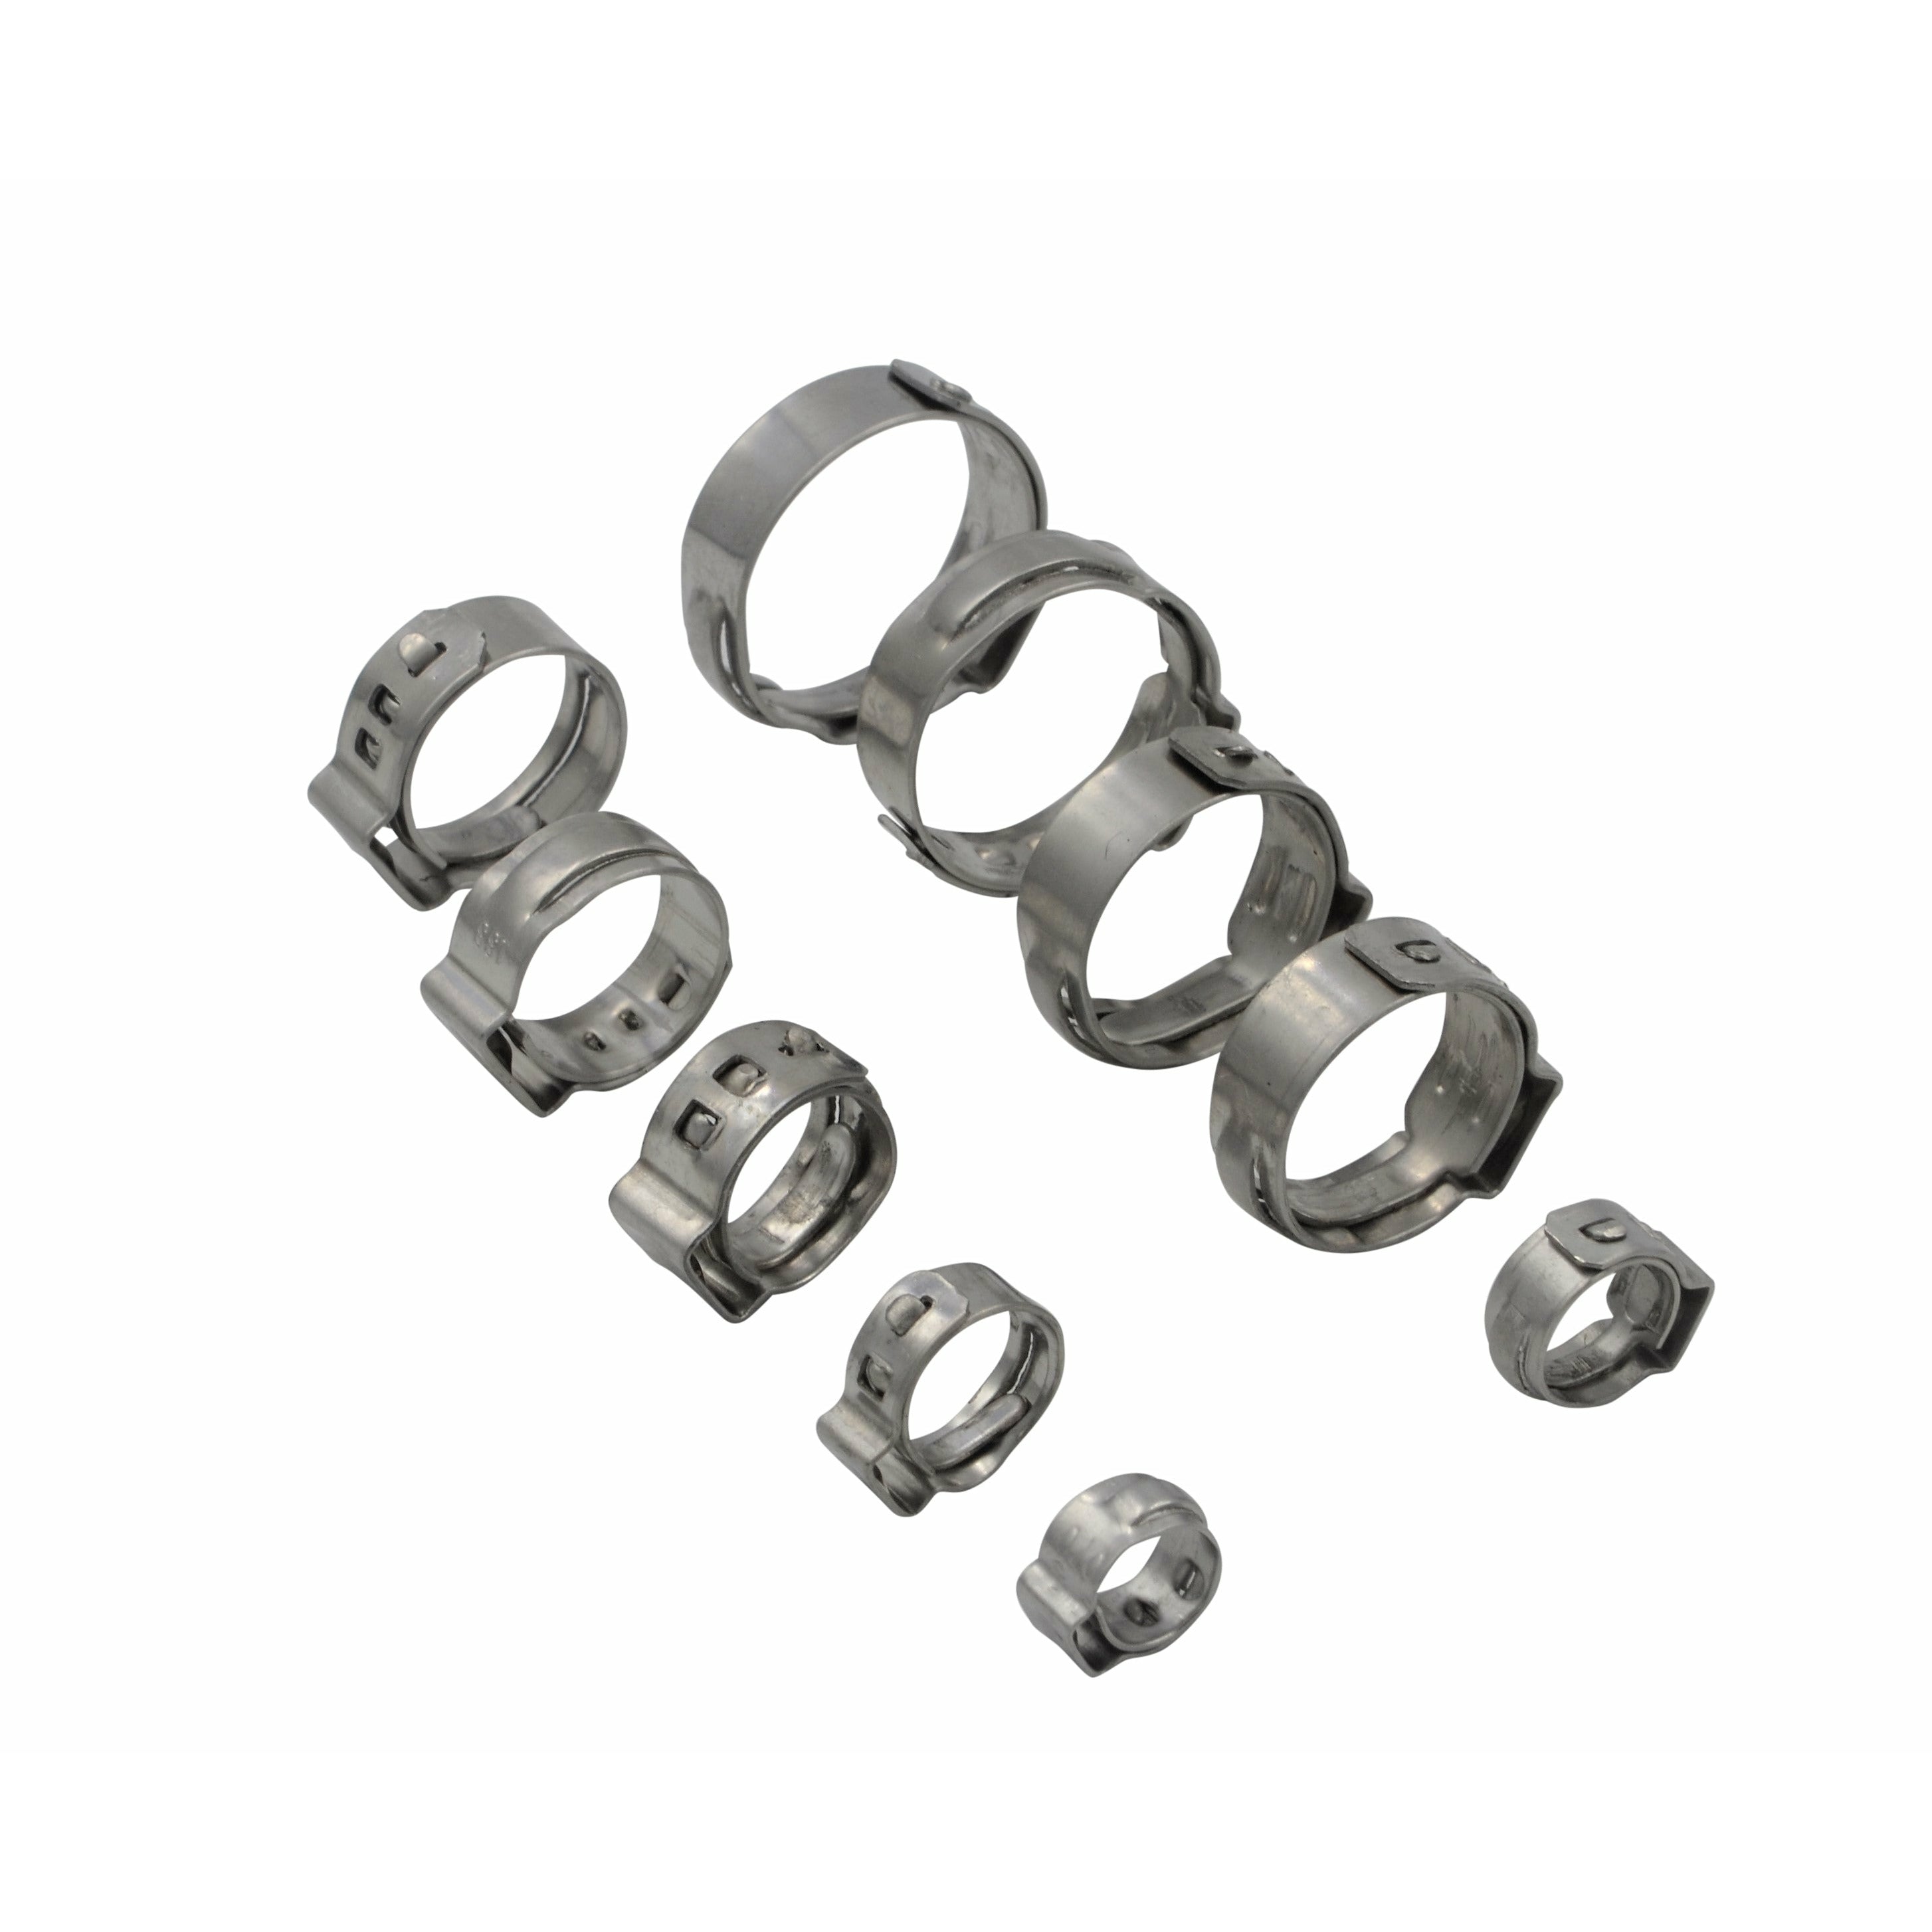 100 Piece 304 Stainless Steel 16-19.2mm Ear Hose Clamp Grab Kit Assortment